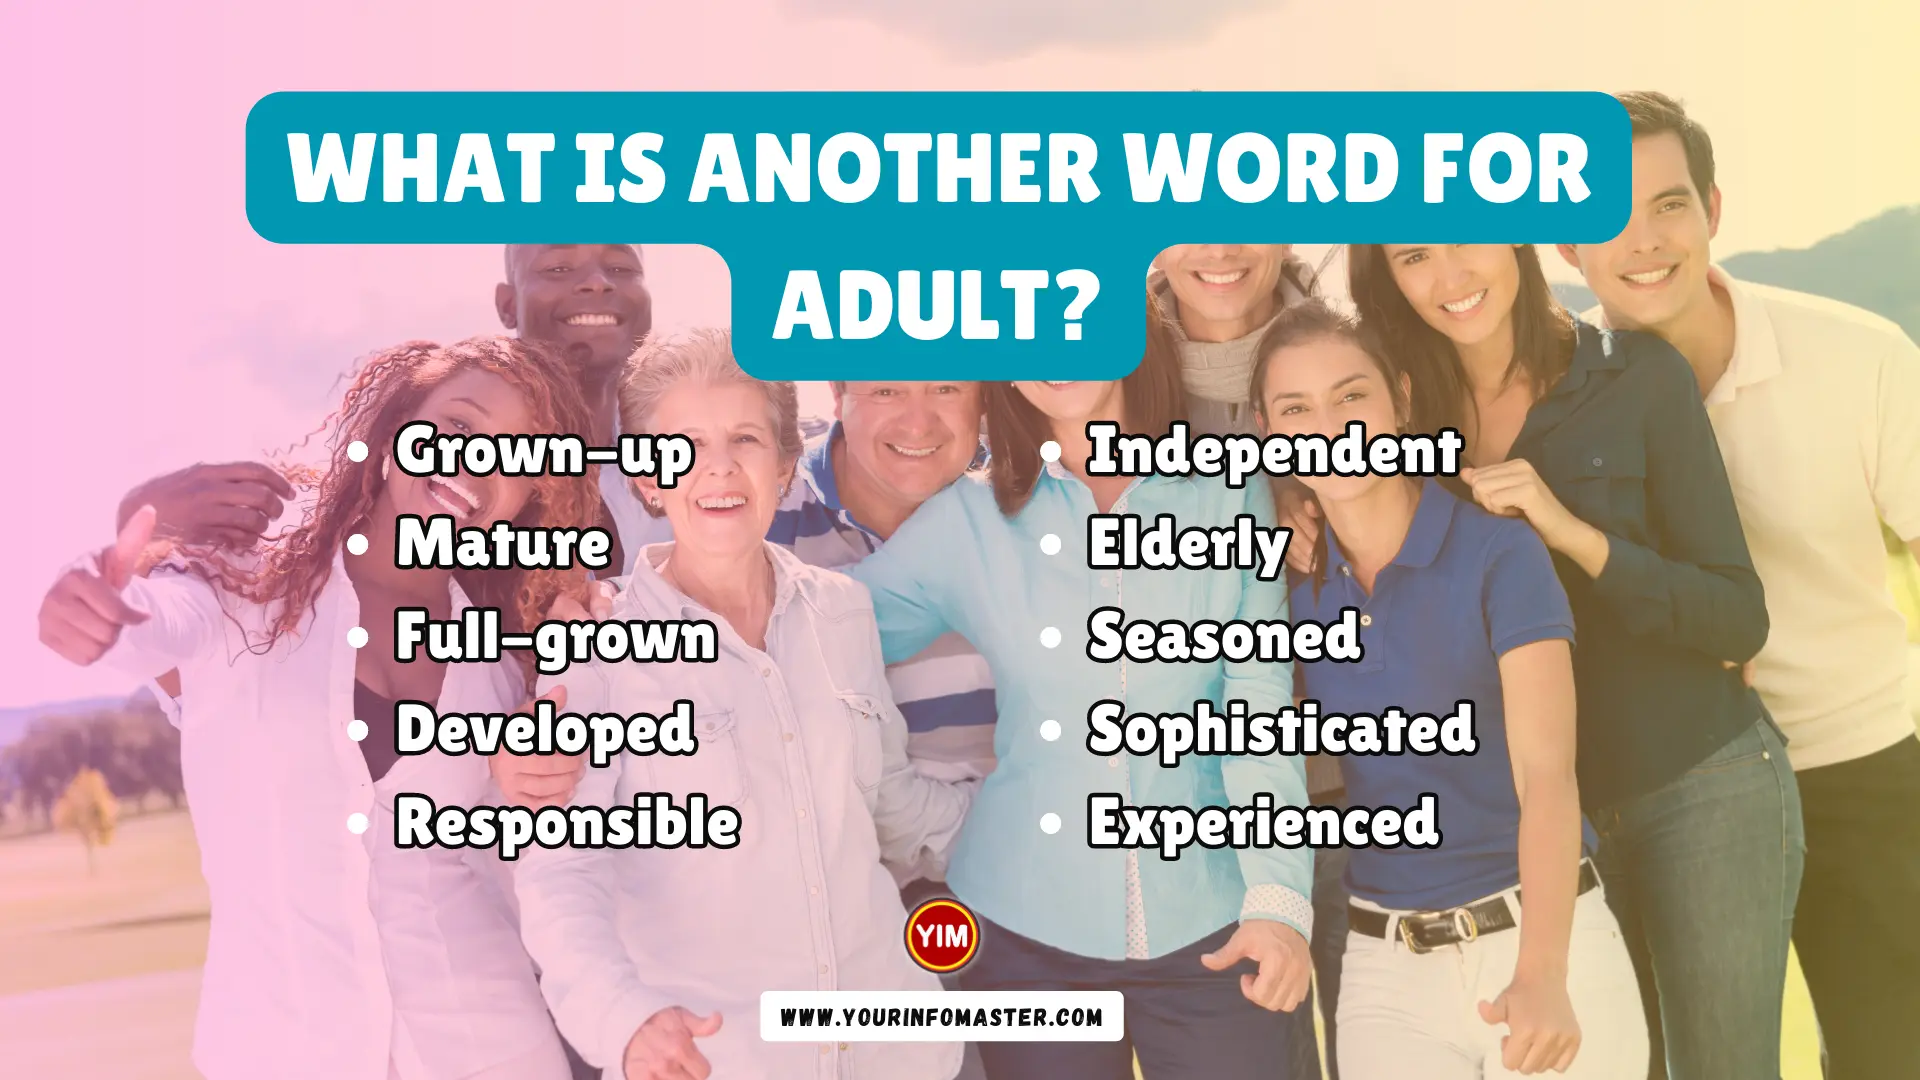 What is another word for Adult